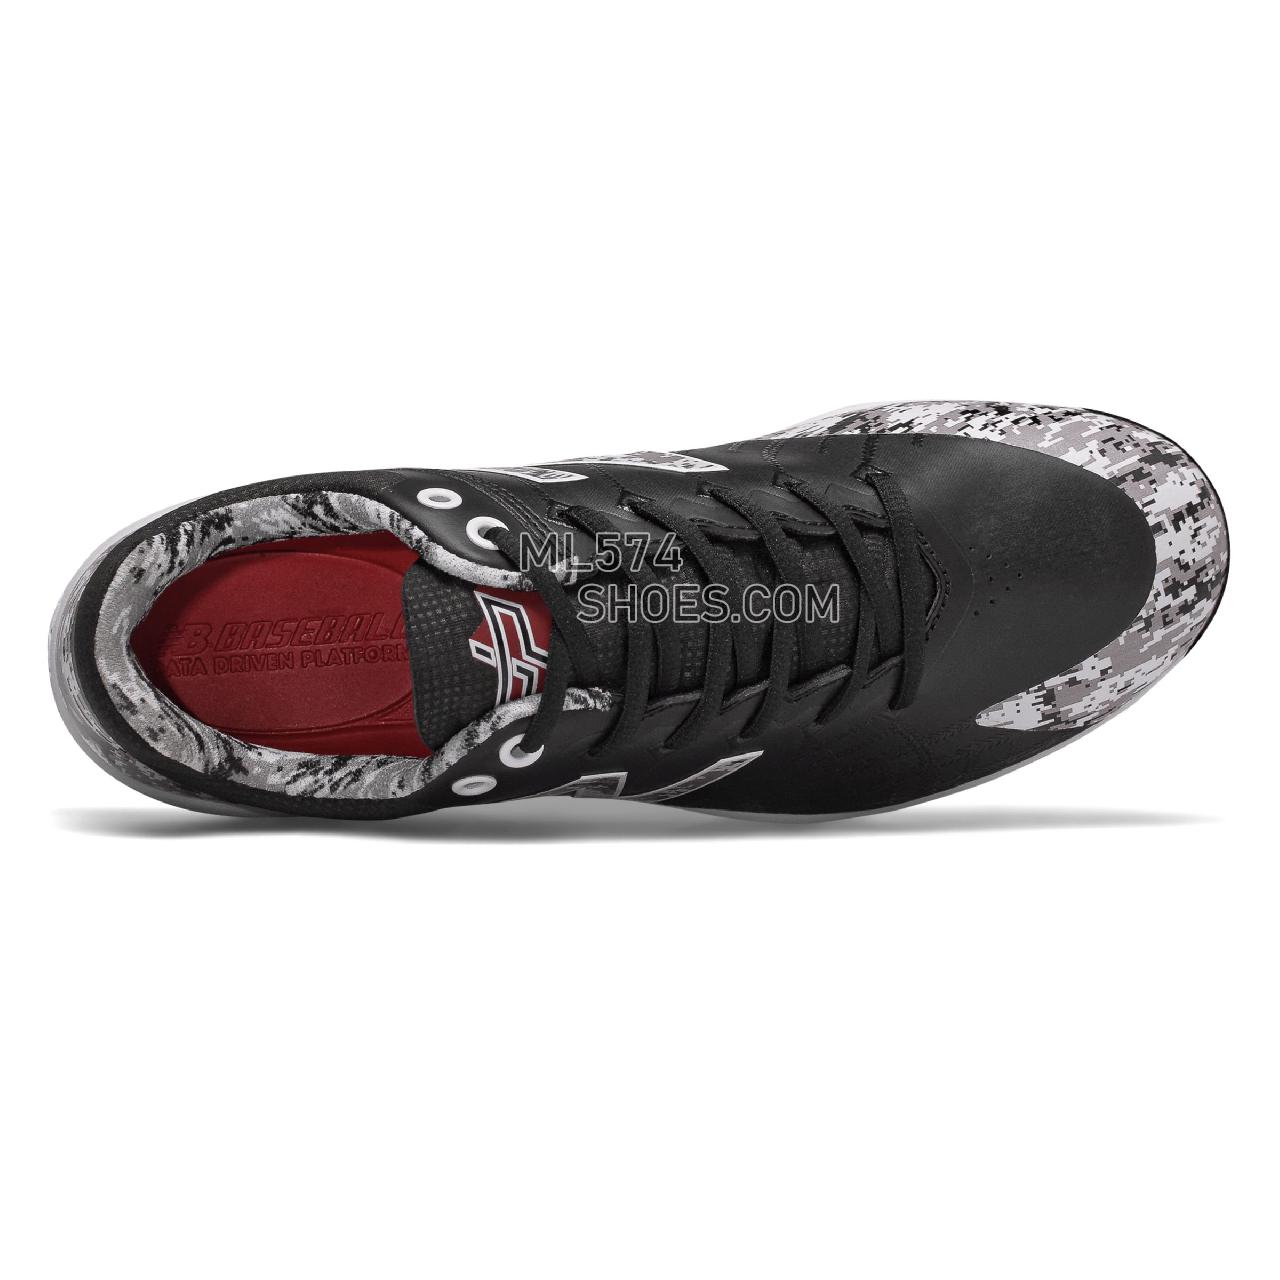 New Balance 4040v5 Pedroia Metal - Men's Baseball Turf - Black Camo with White and Red - L4040PK5